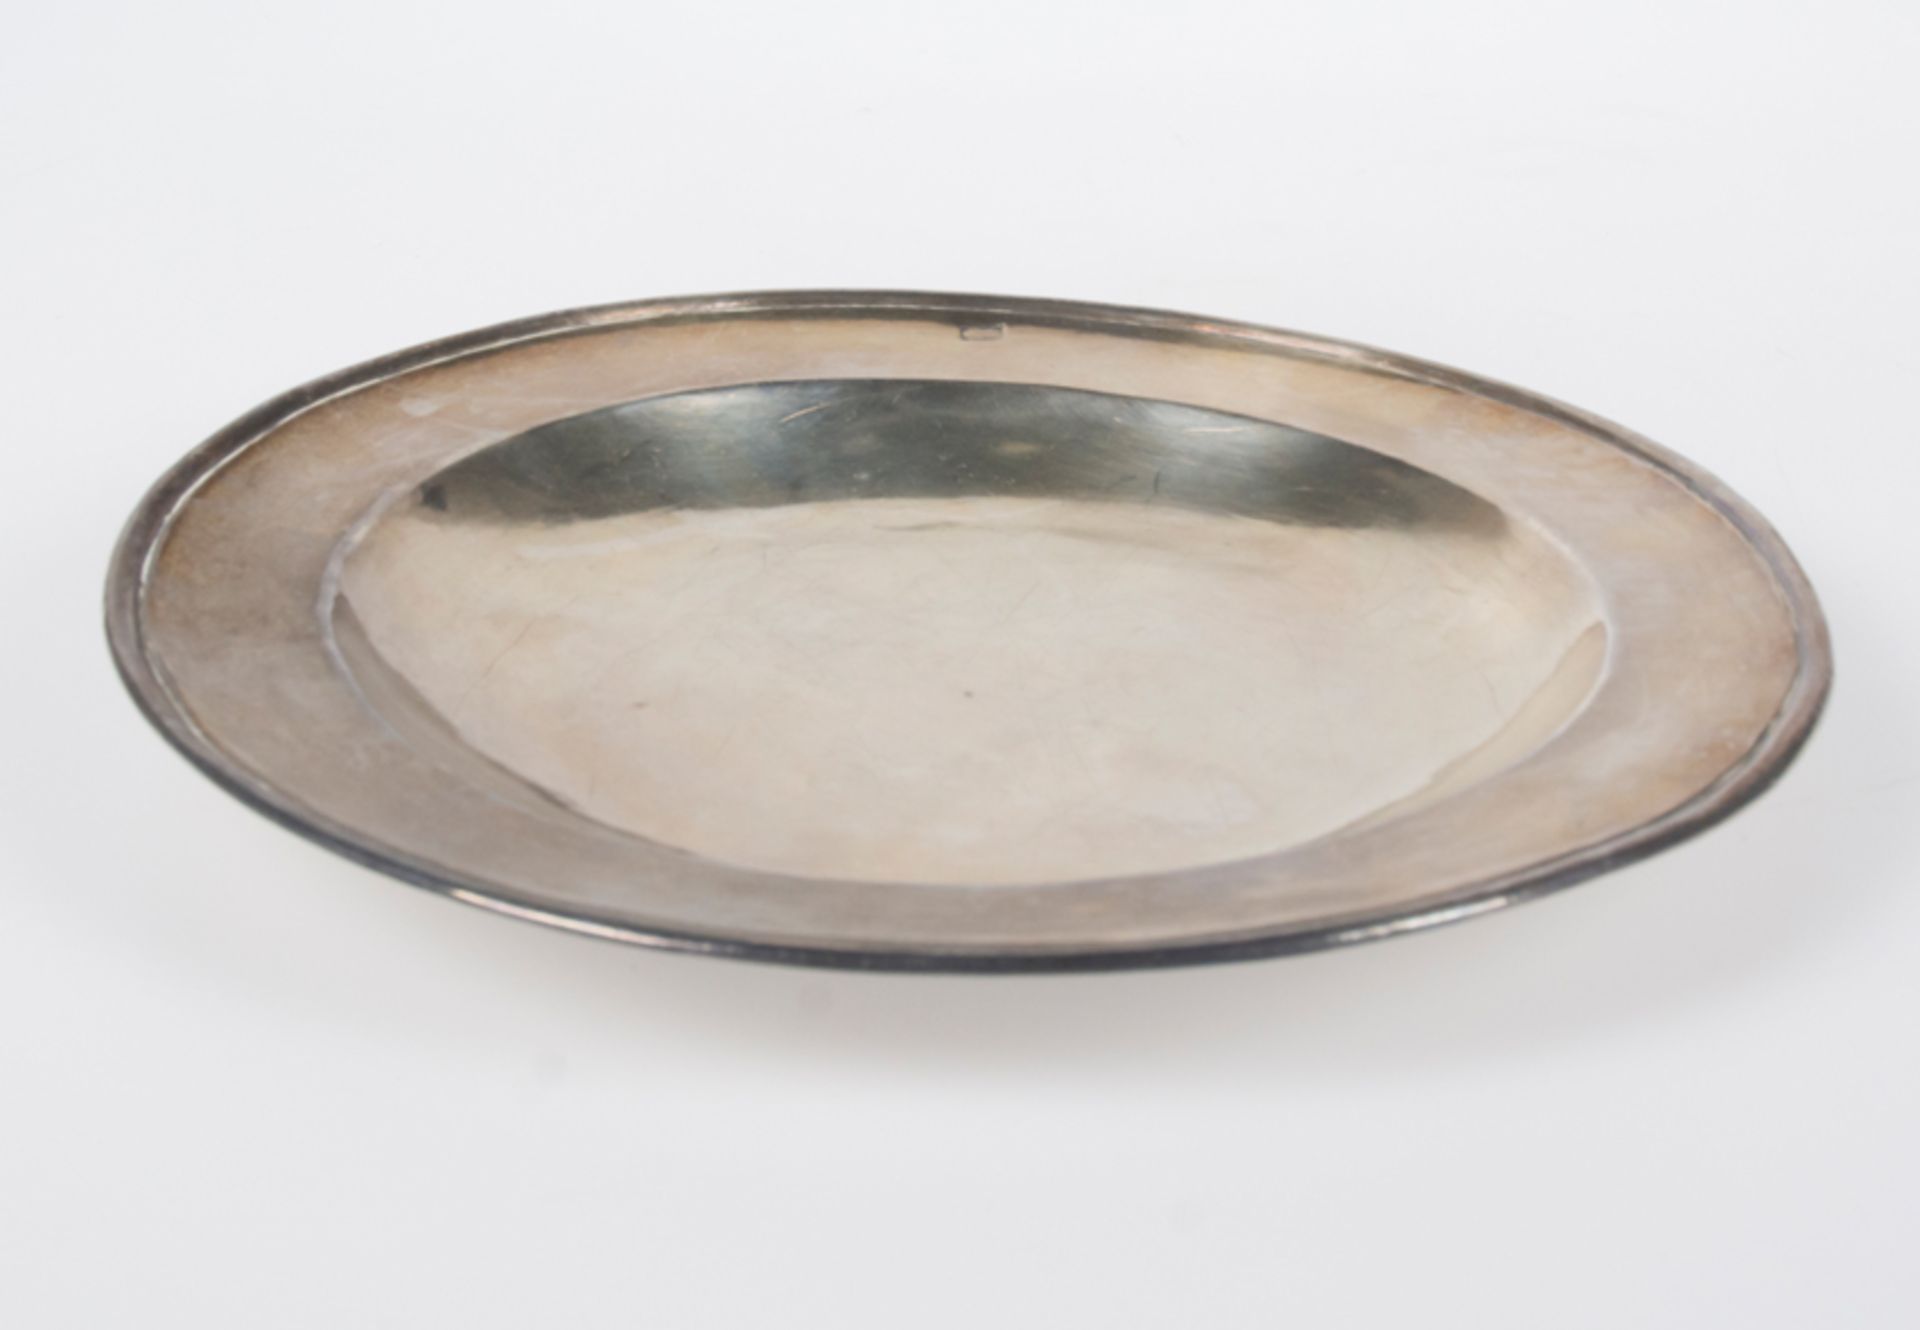 Marked silver plate. 18th century.